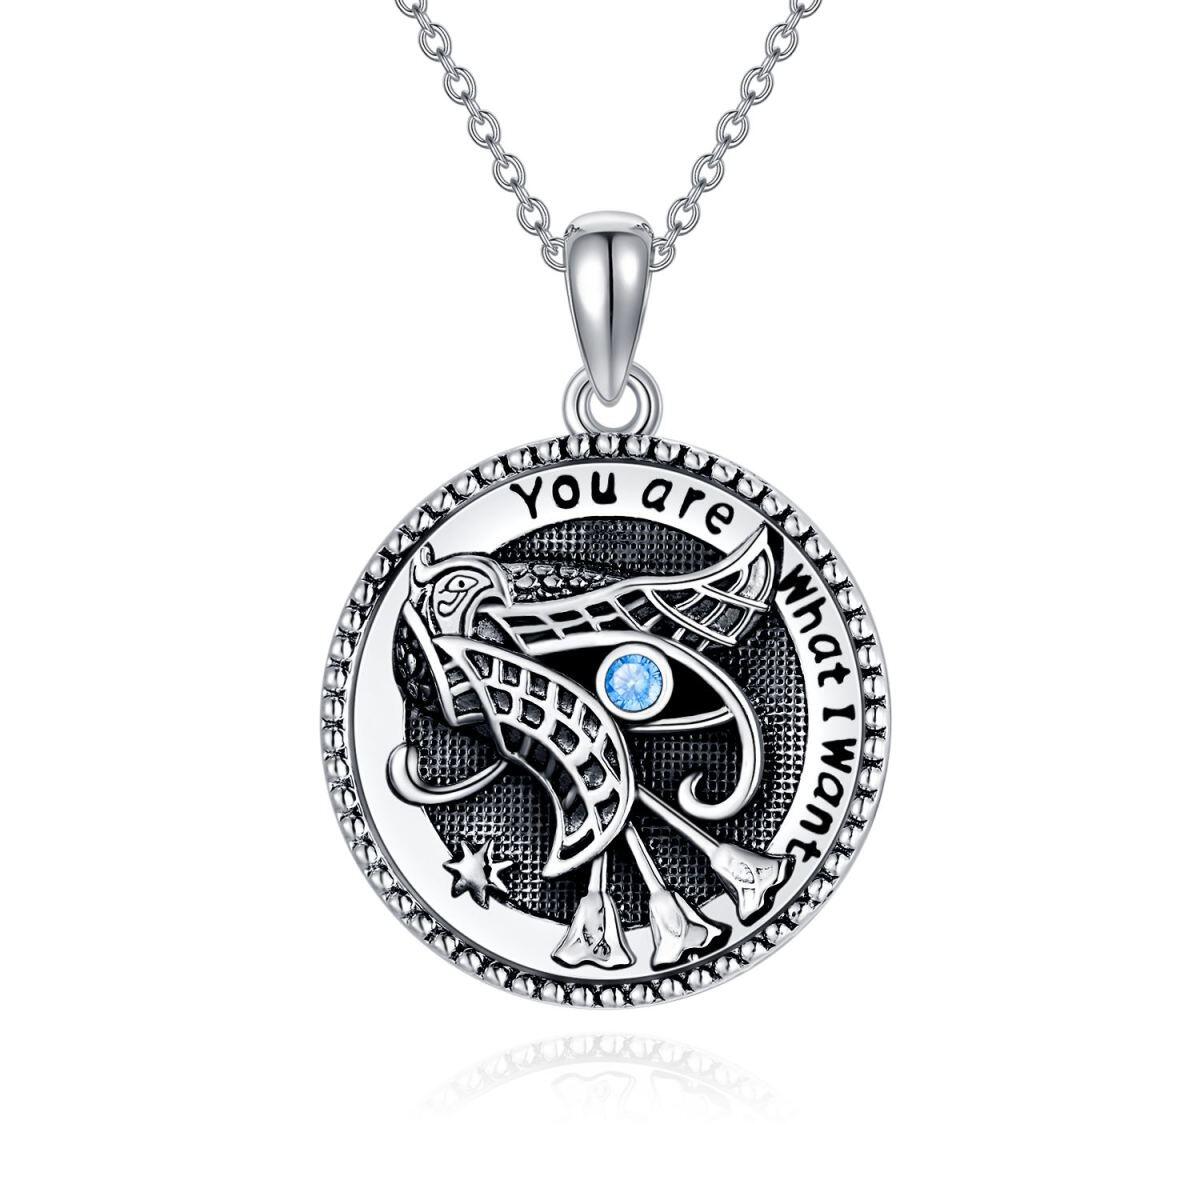 Sterling Silver Cubic Zirconia Owl Pendant Necklace with Engraved Word-1